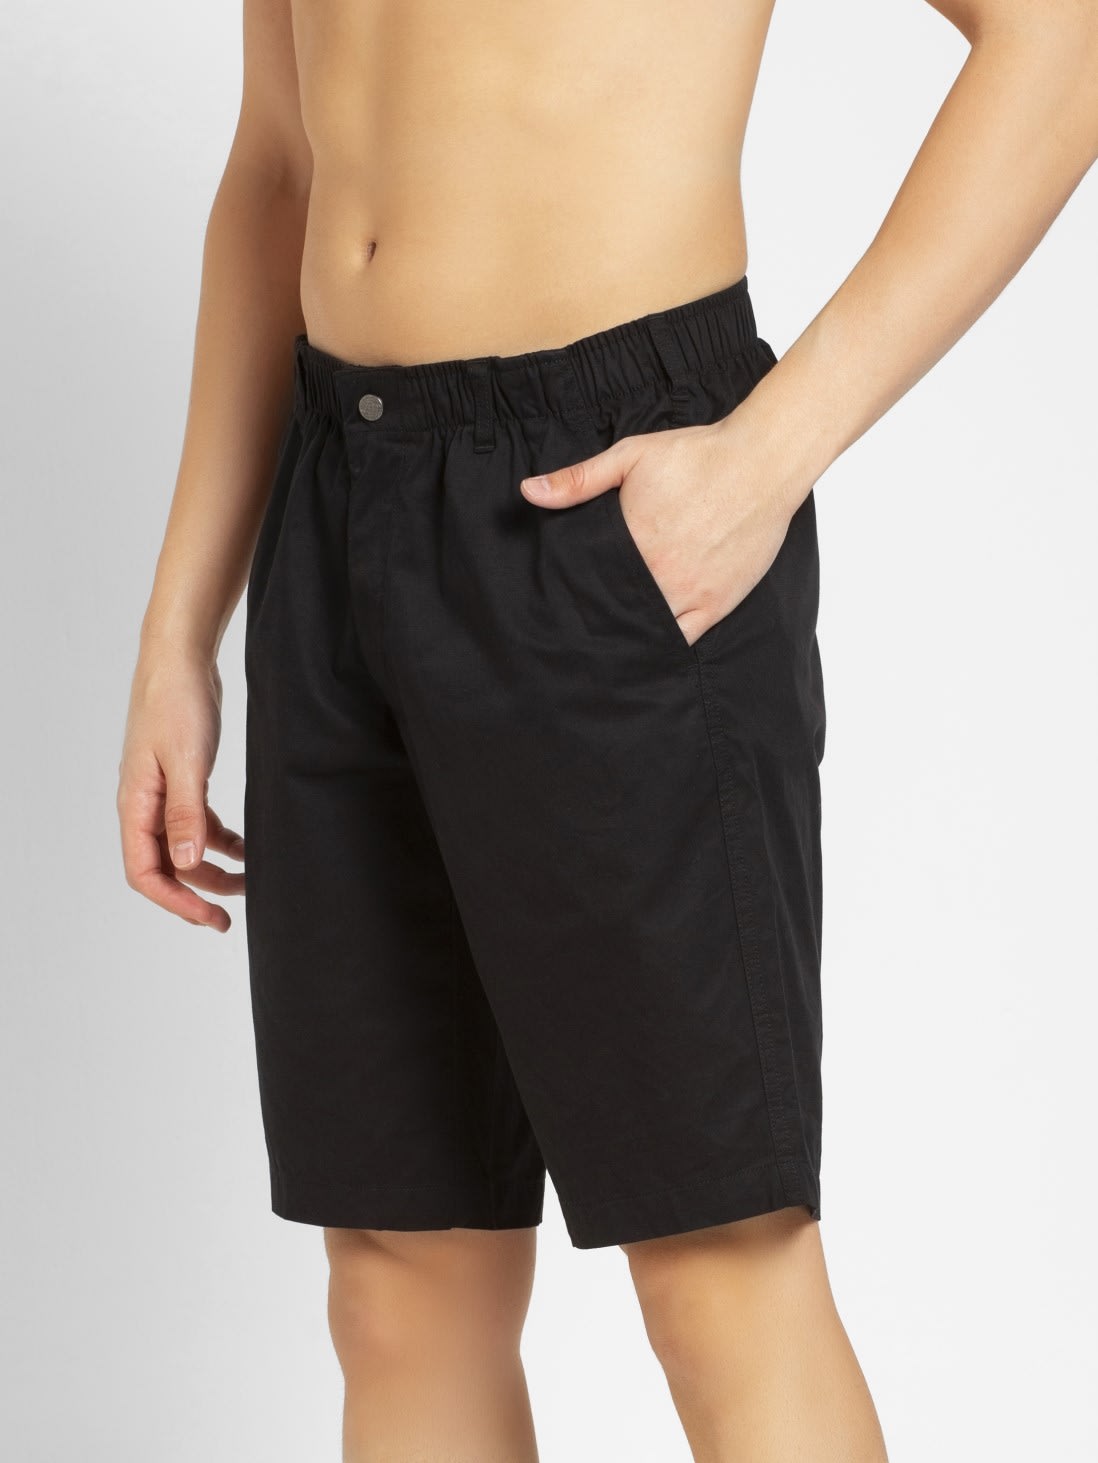 Buy Black Shorts with Button & Zipper Fly Closure for Men 1203 | Jockey ...